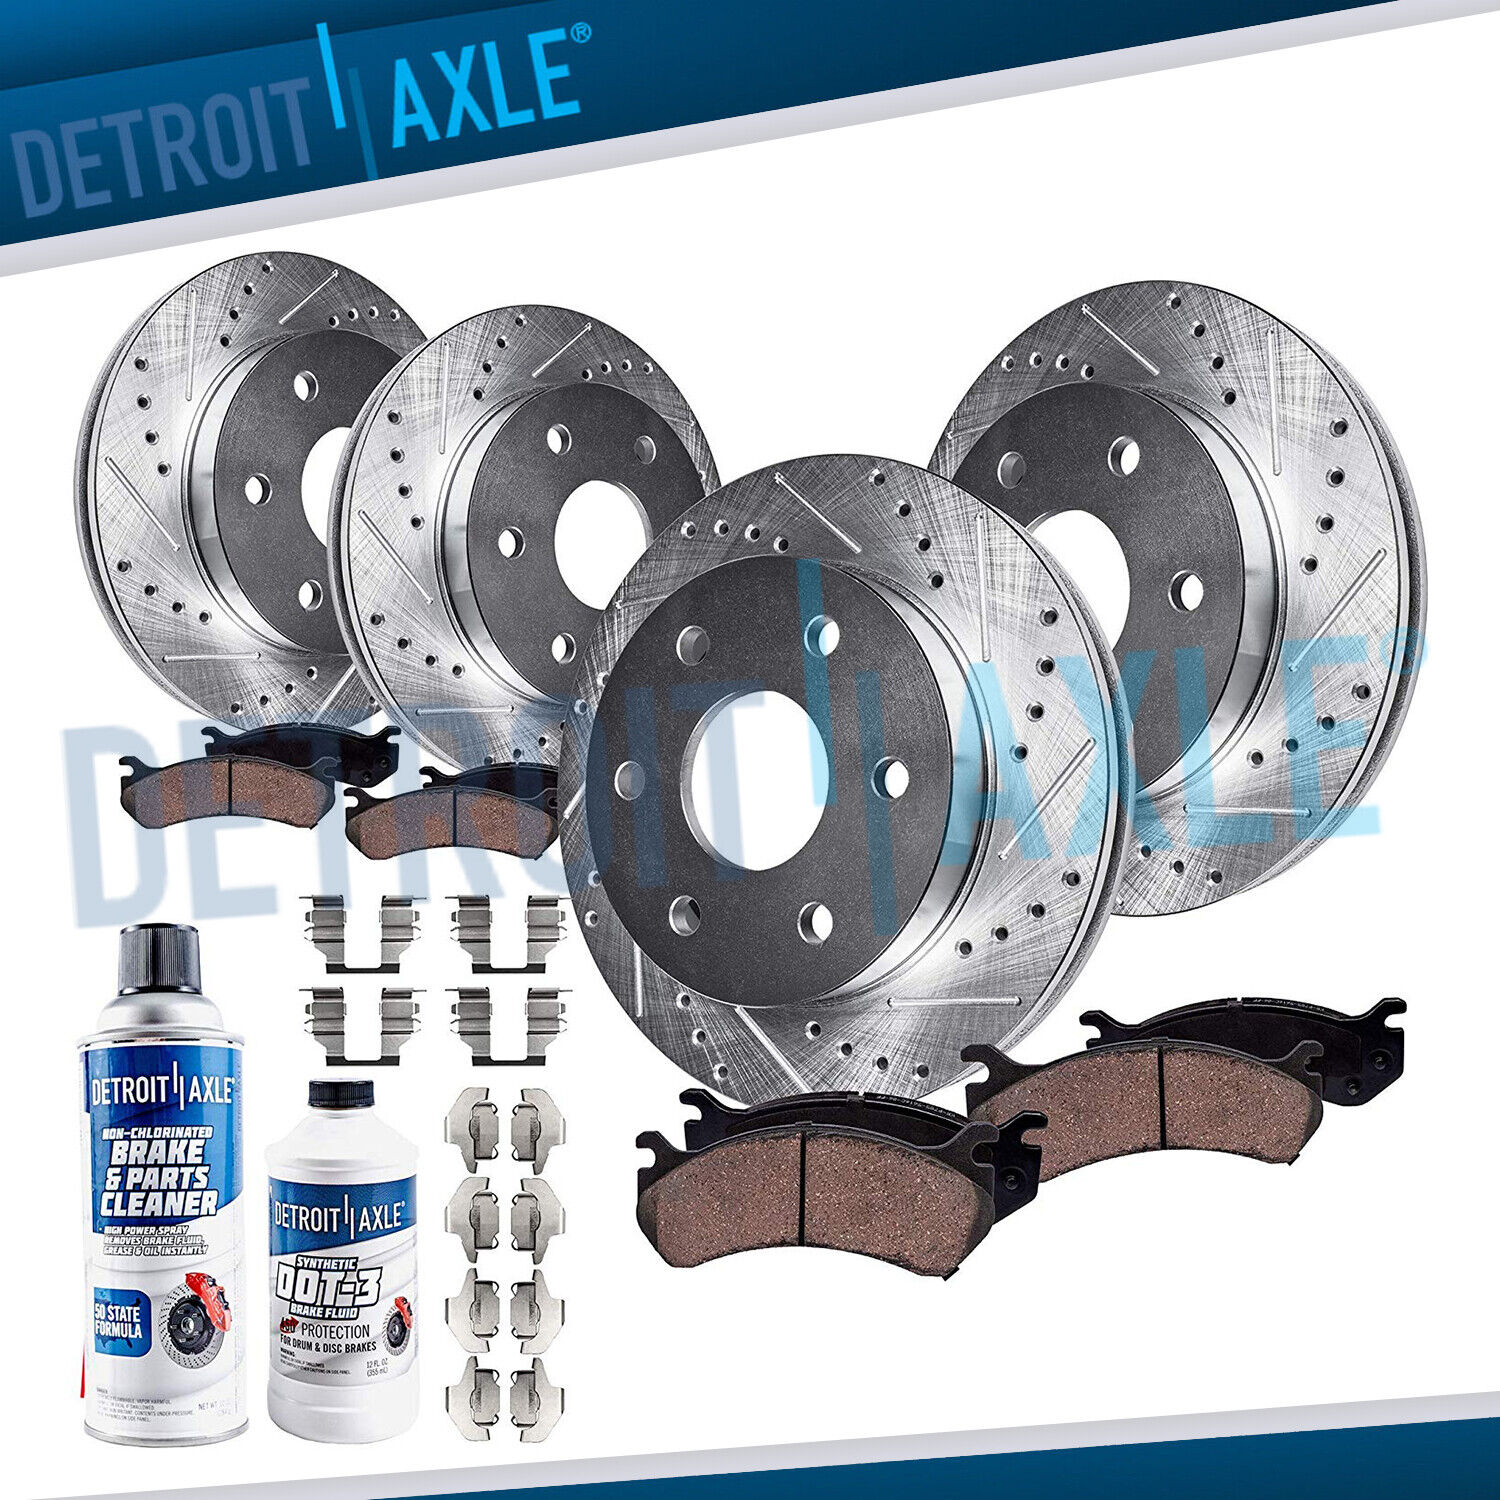 Front & Rear Drilled Rotors Brake Pads for Nissan Xterra Frontier Suzuki Equator